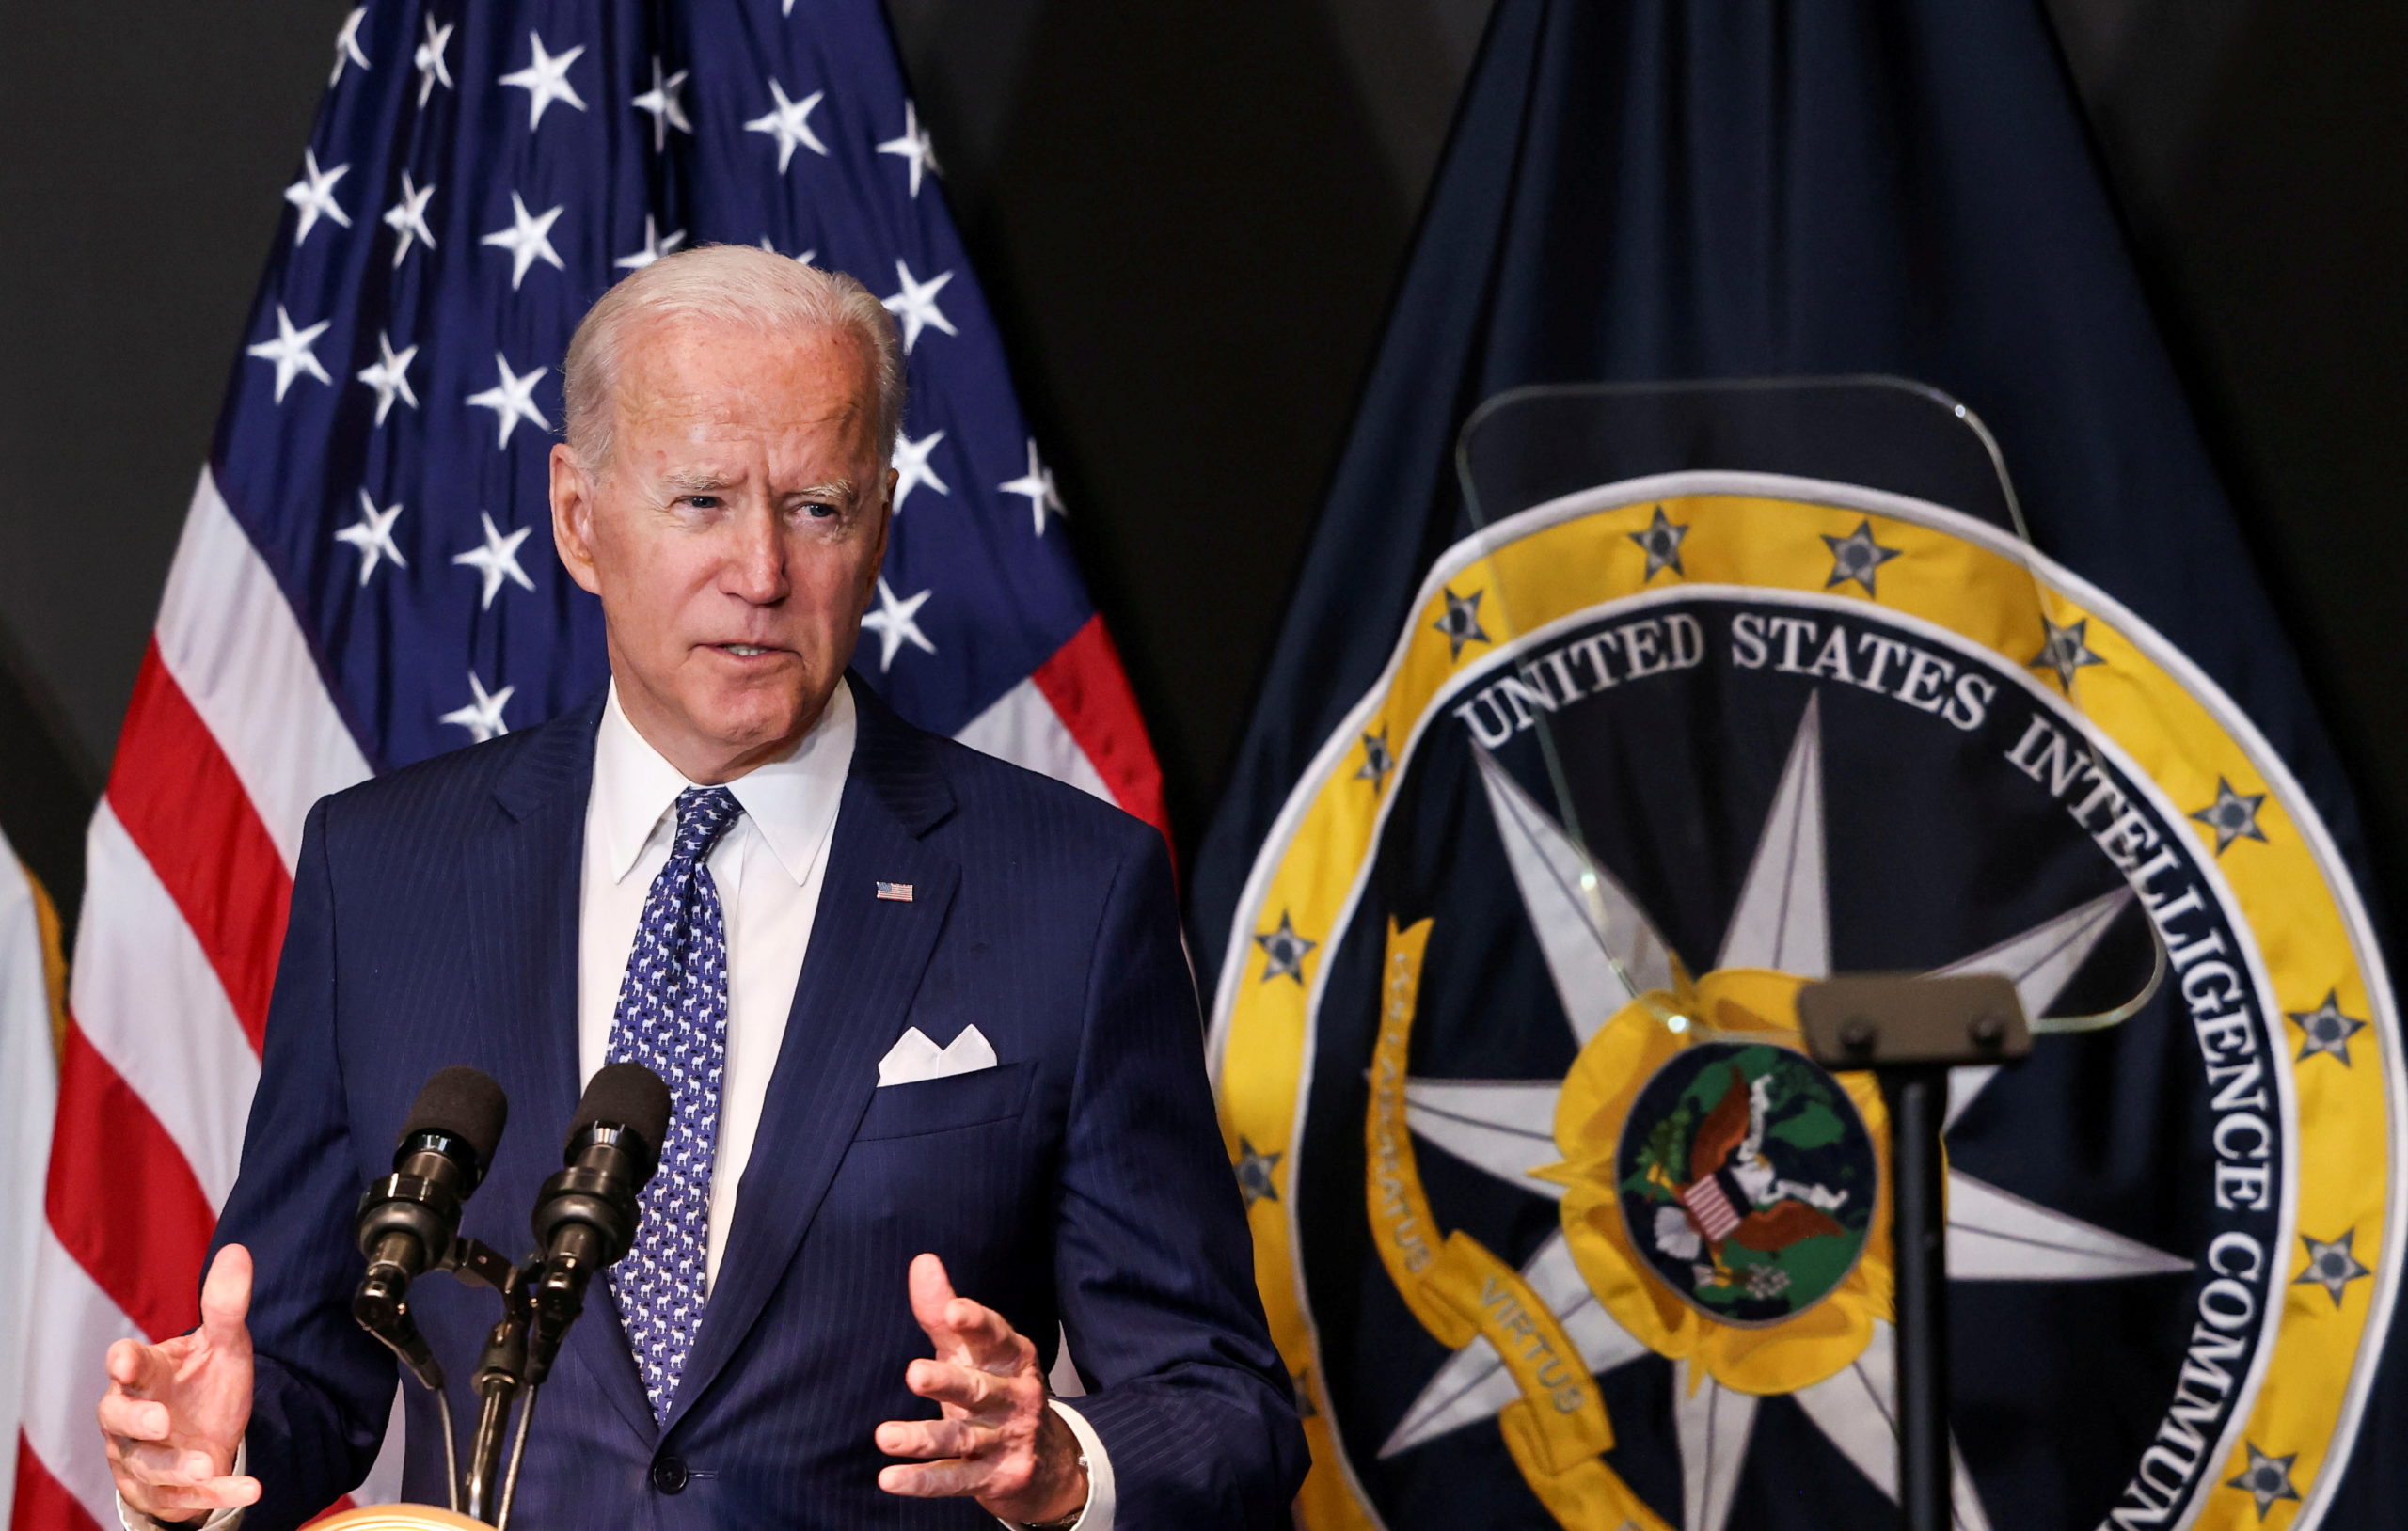 U.S. President Joe Biden delivers remarks to members of "the intelligence community workforce and its leadership" as he visits the Office of the Director of National Intelligence in nearby McLean, Virginia outside Washington, U.S., July 27, 2021. REUTERS/Evelyn Hockstein